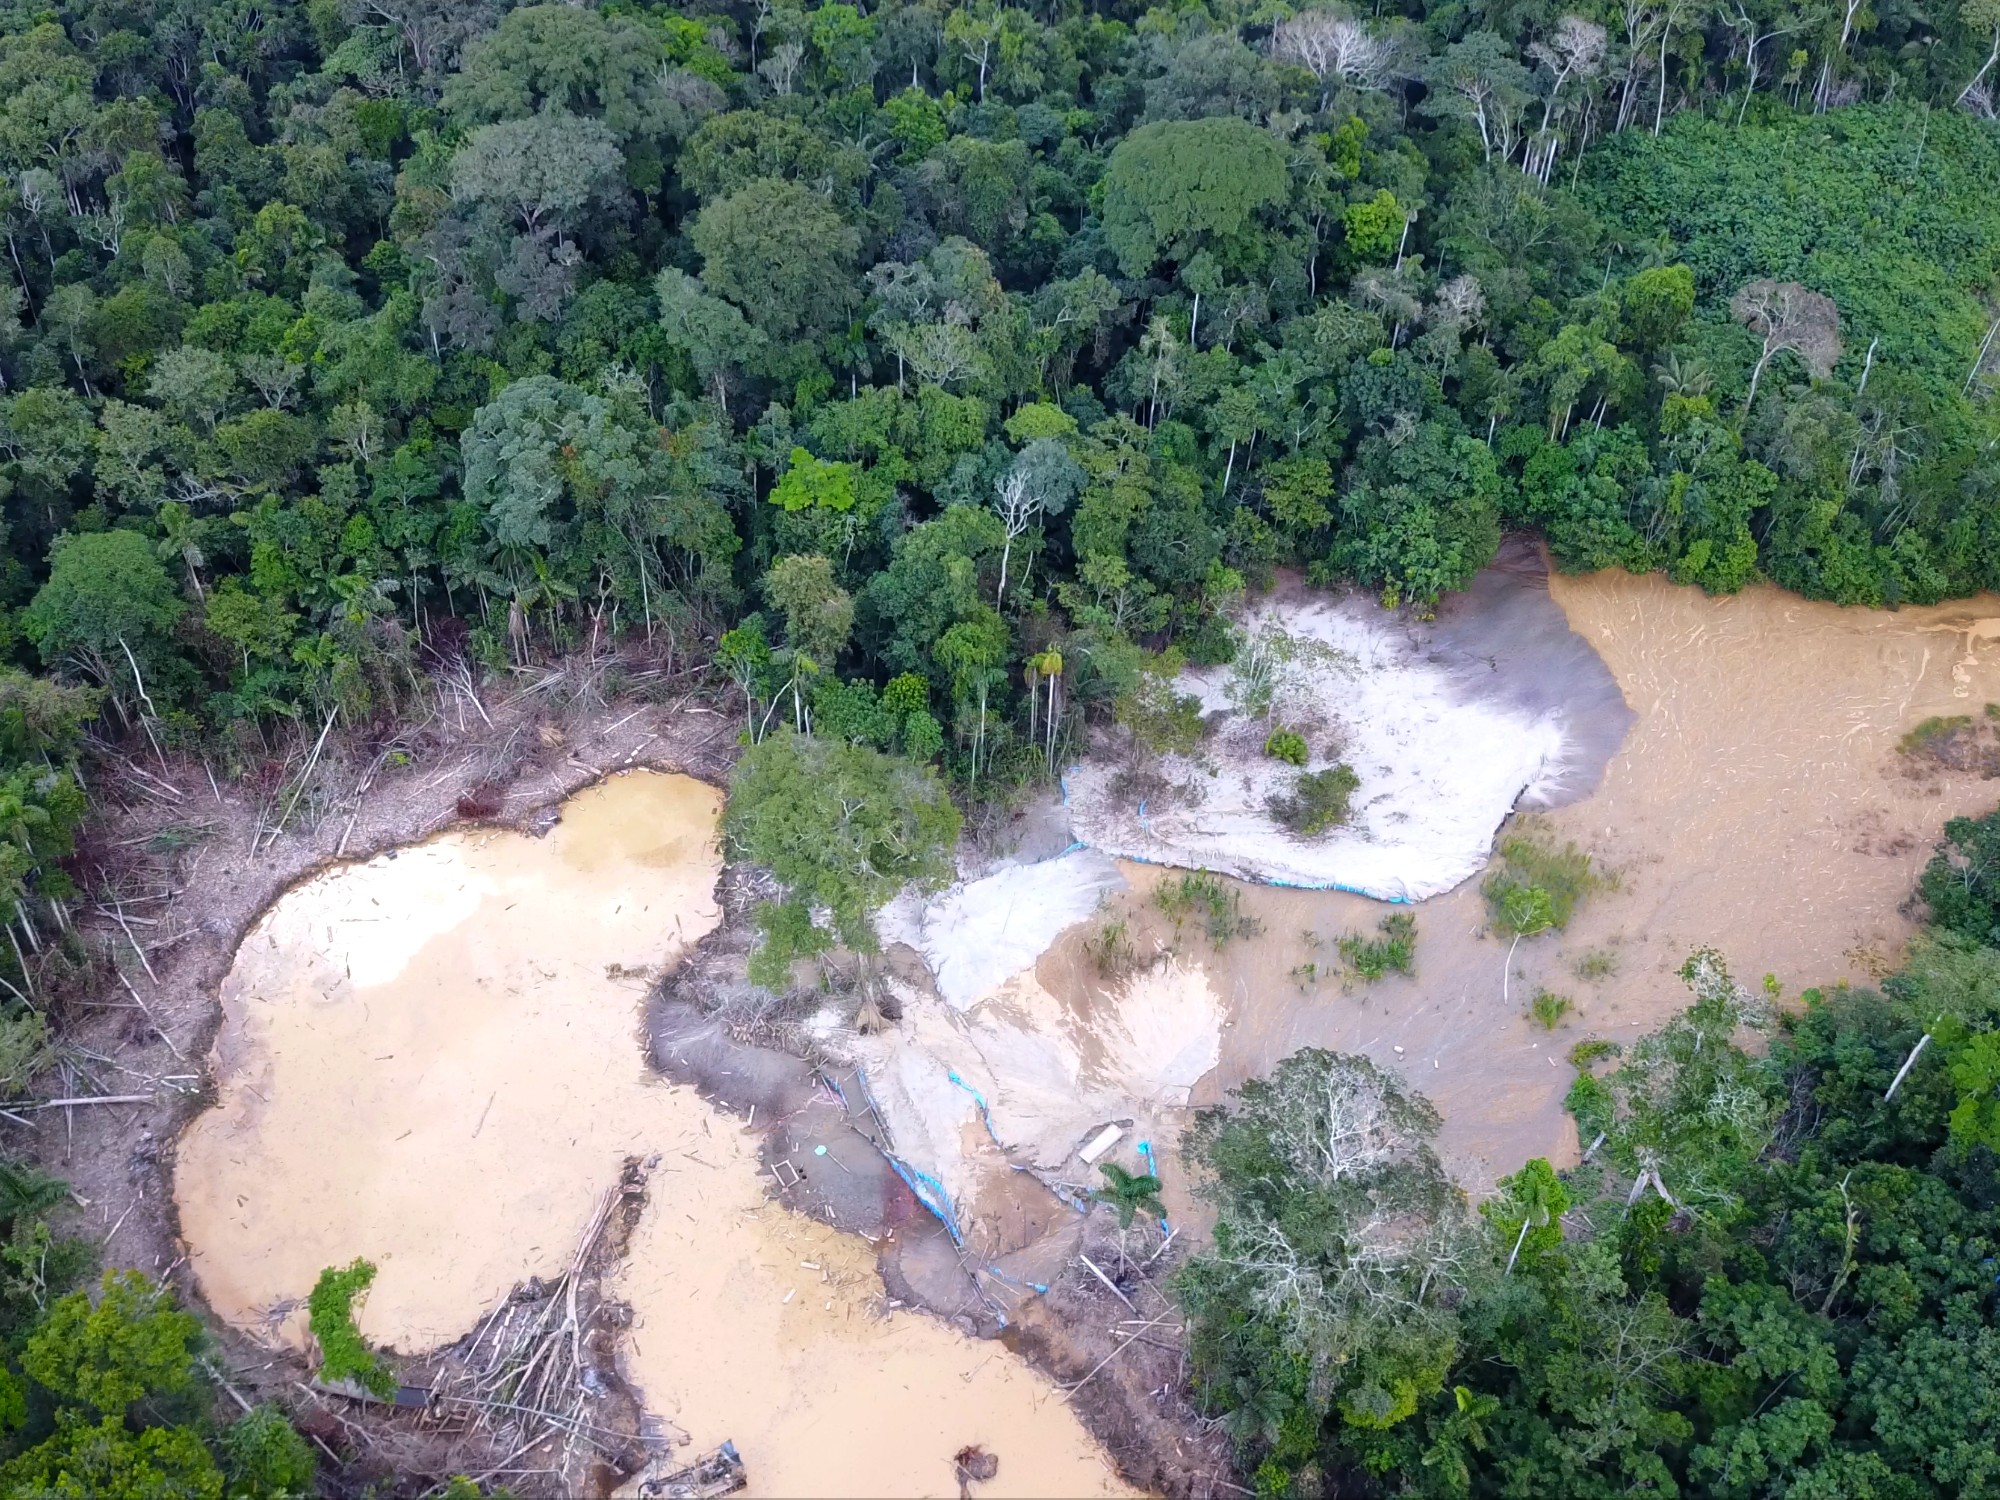 A drone-photograph shows an illegal mine in the middle of the Amazon rainforest. The image shows two artisanal pools, where the miners separate gold from rocks using mercury.